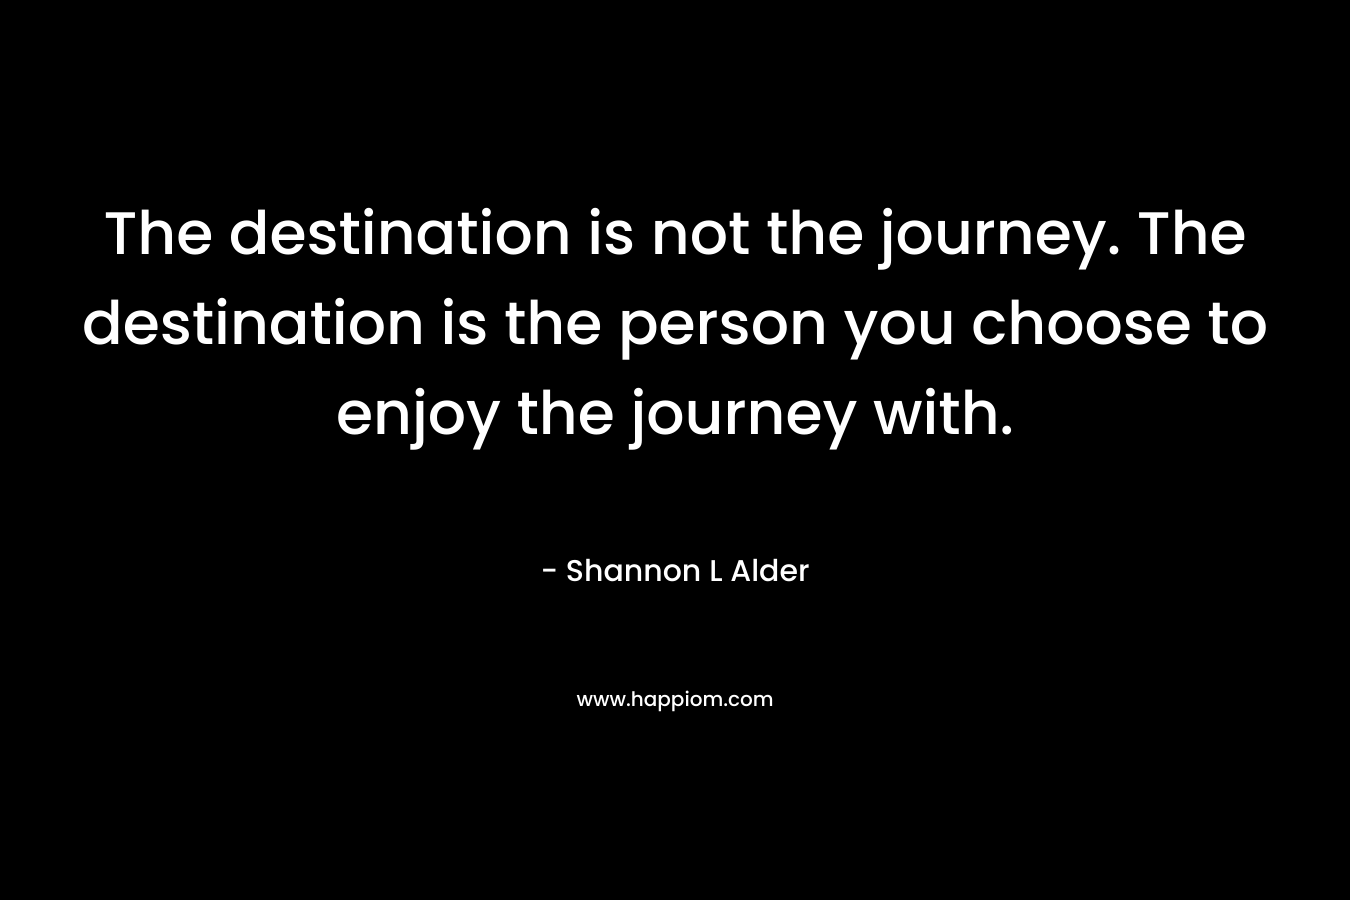 The destination is not the journey. The destination is the person you choose to enjoy the journey with.